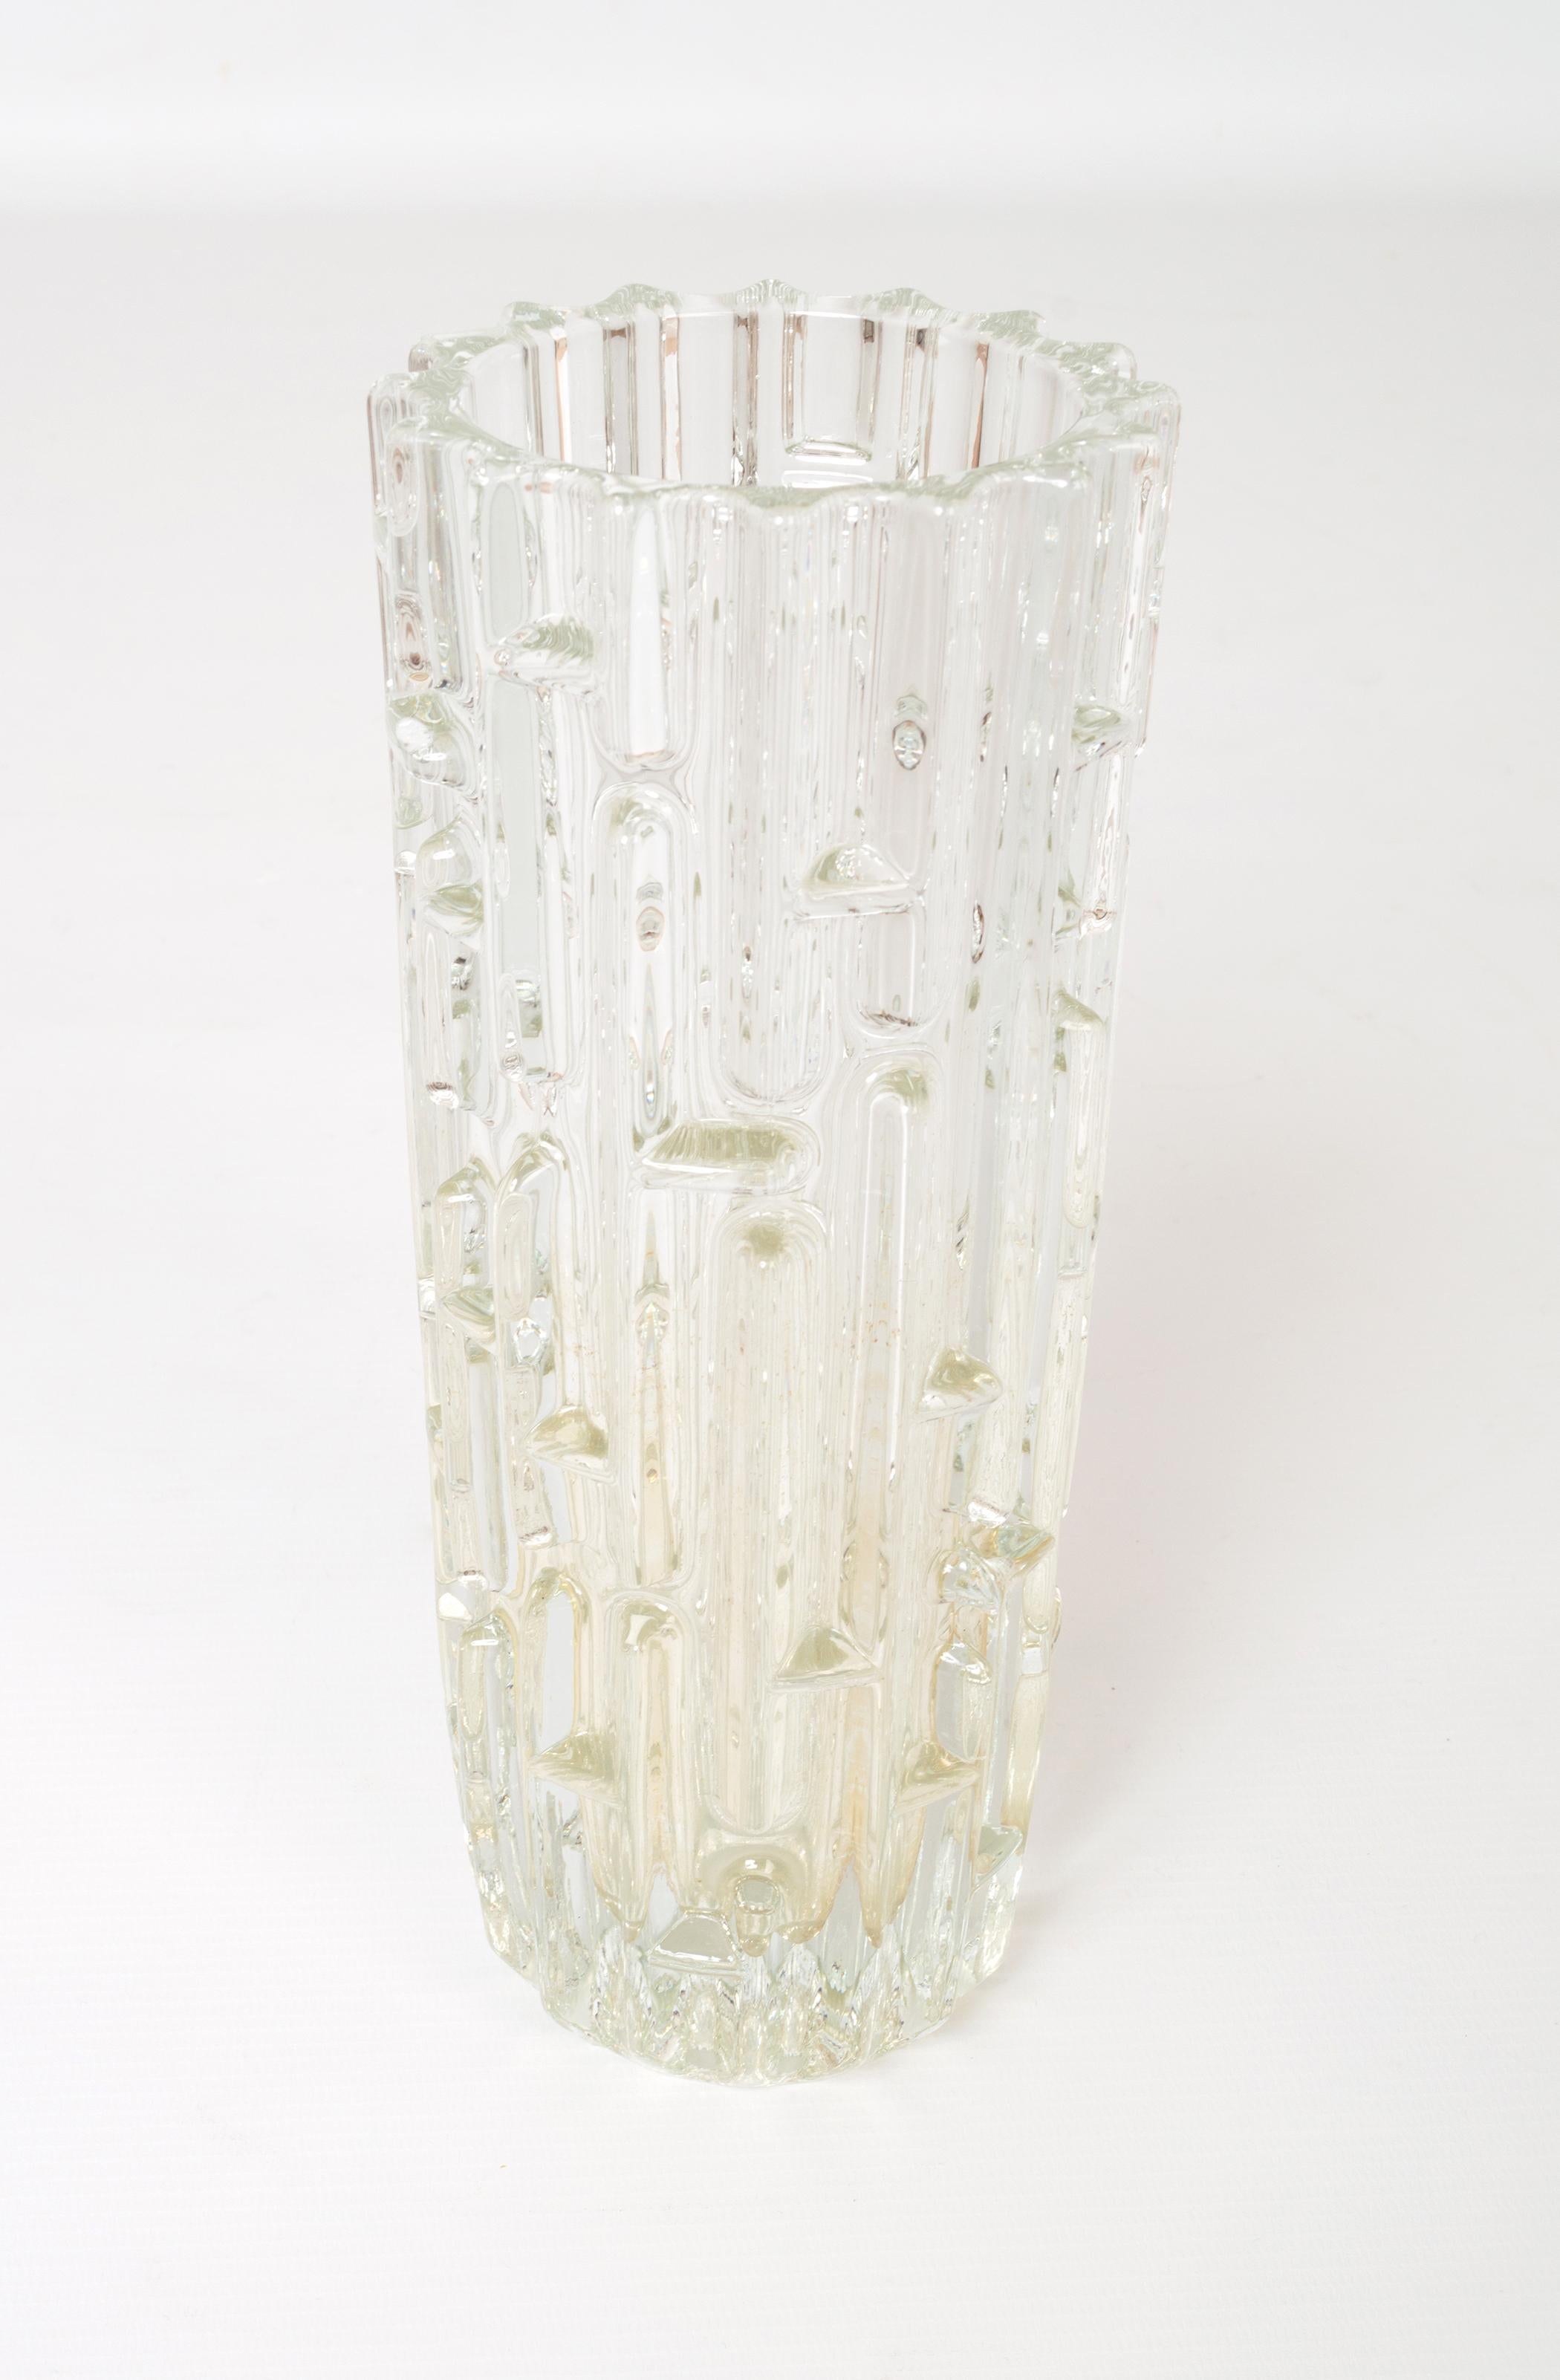 Mid century Czech clear Geometric glass vase designed by Frantisek Vizner, 1965.

Presented in excellent condition, free from chips or cracks.